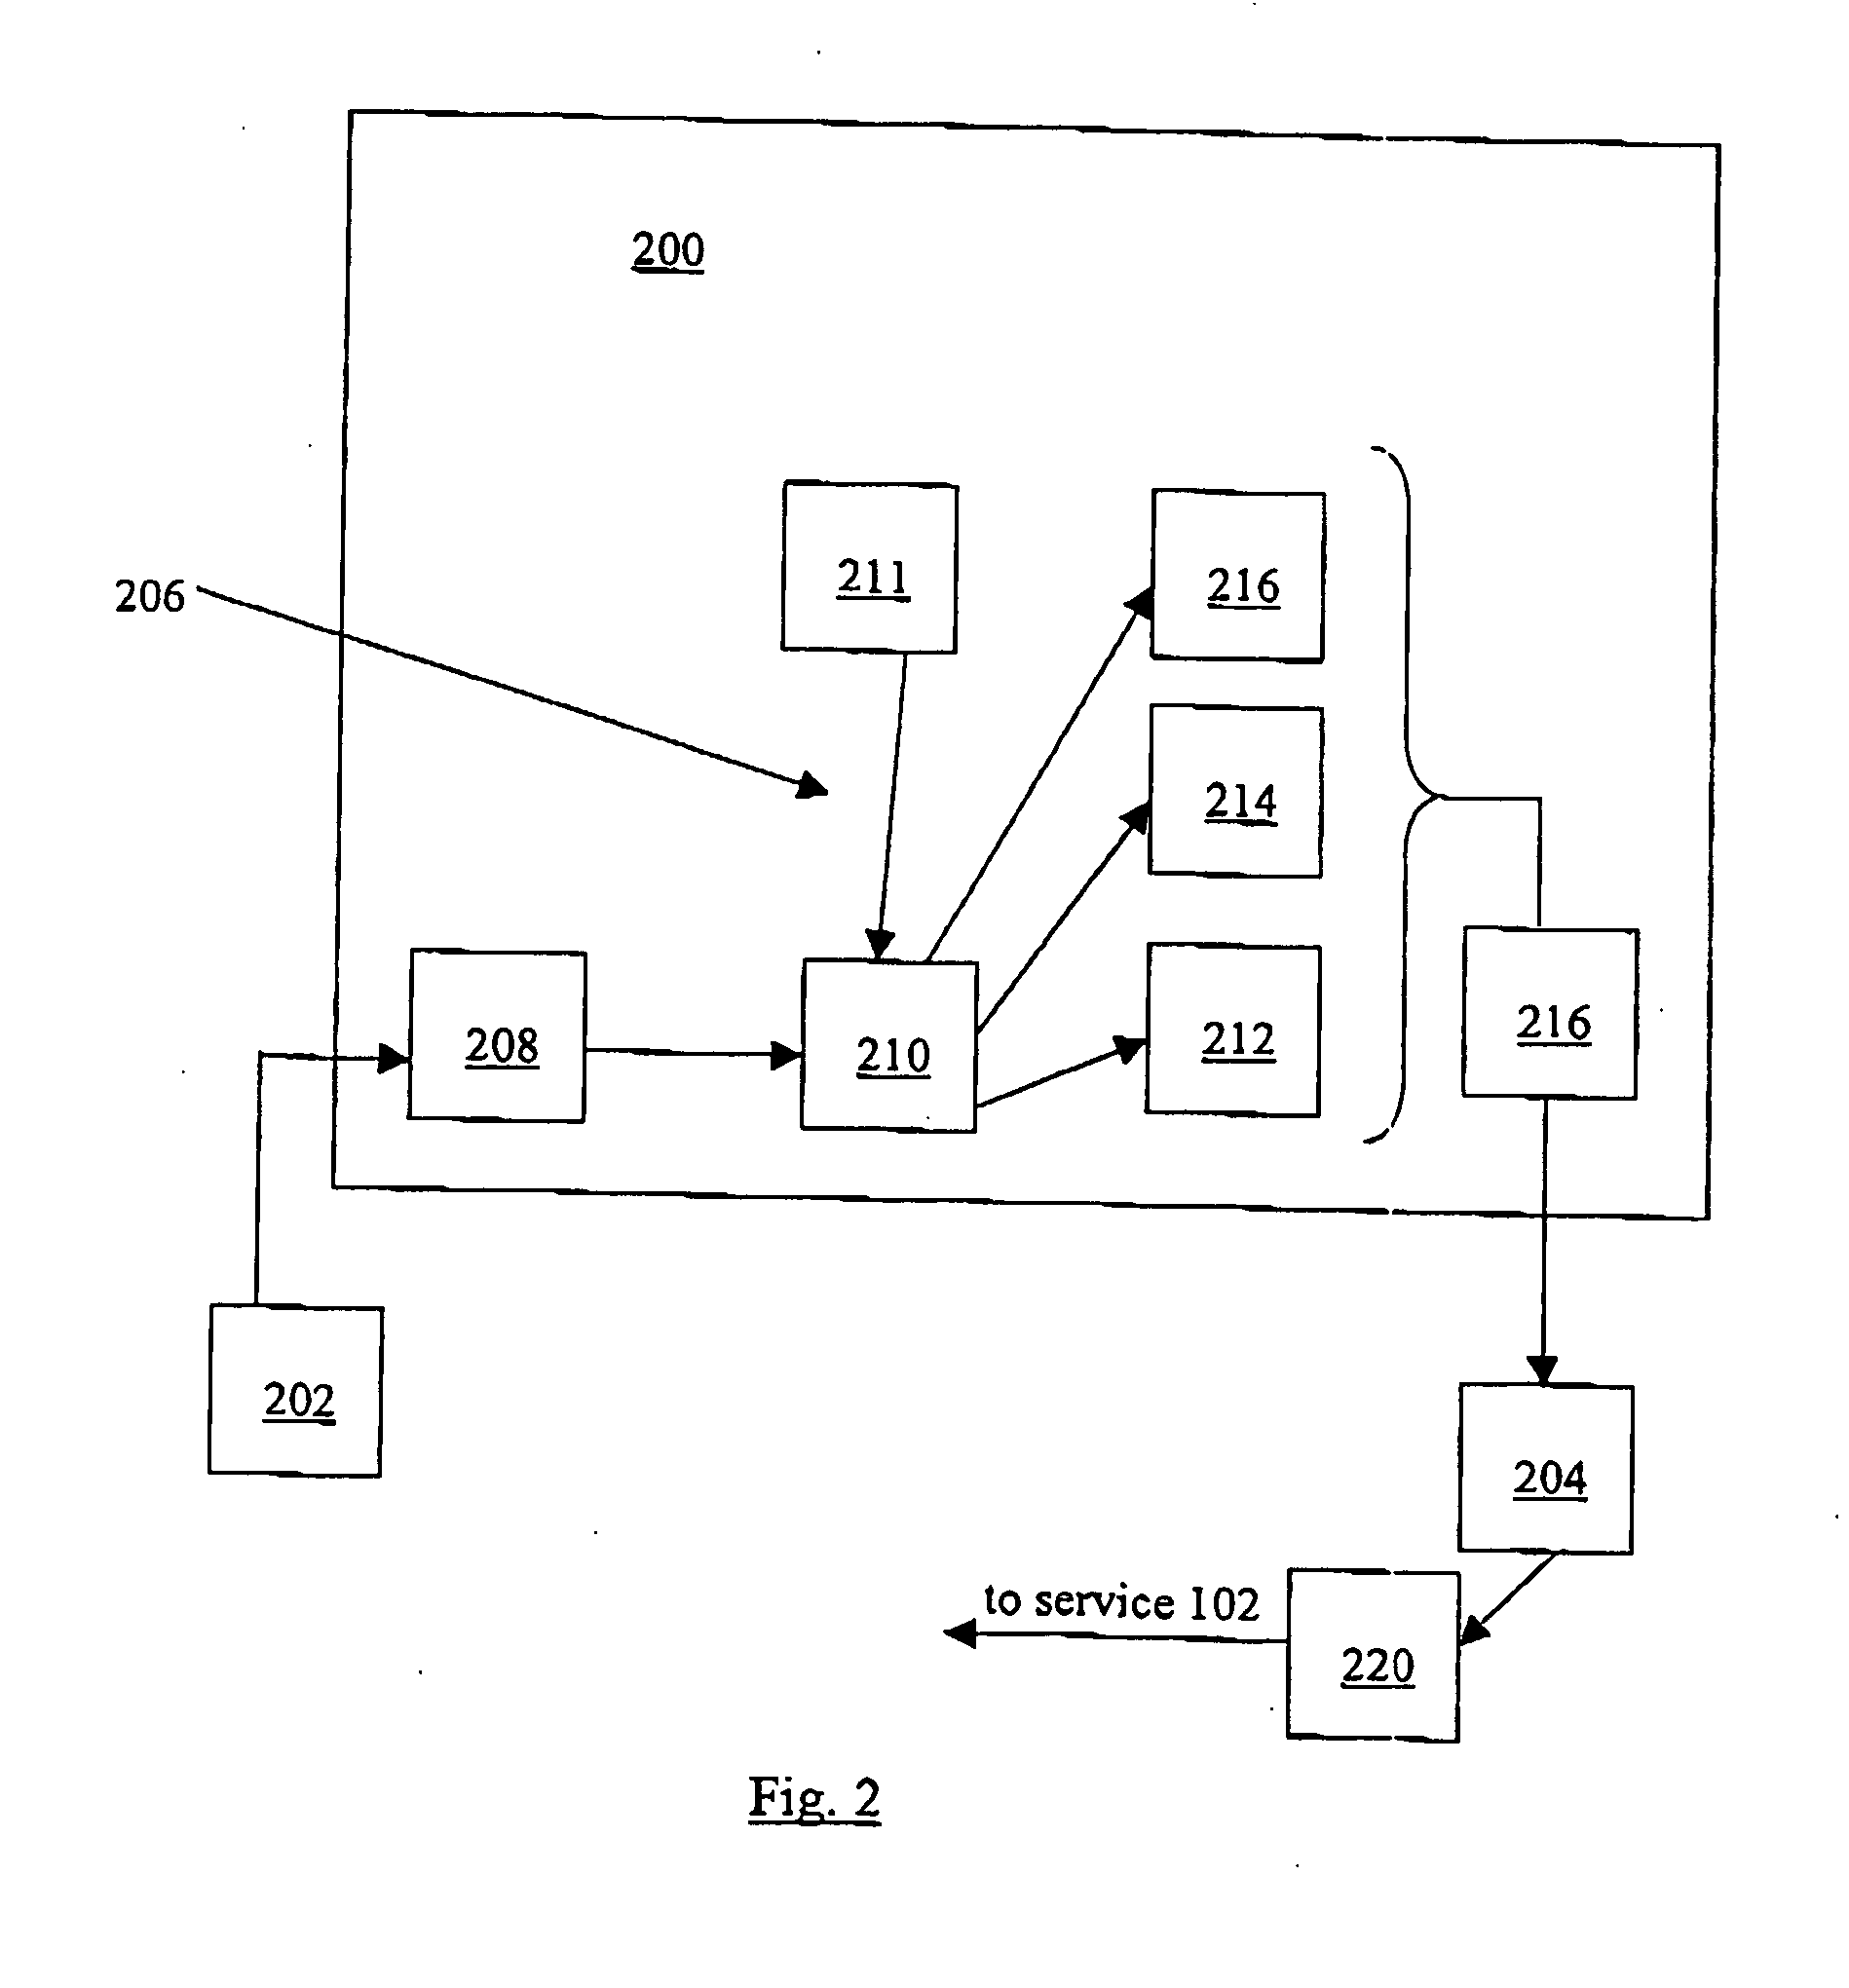 System and method for producing notification based web services